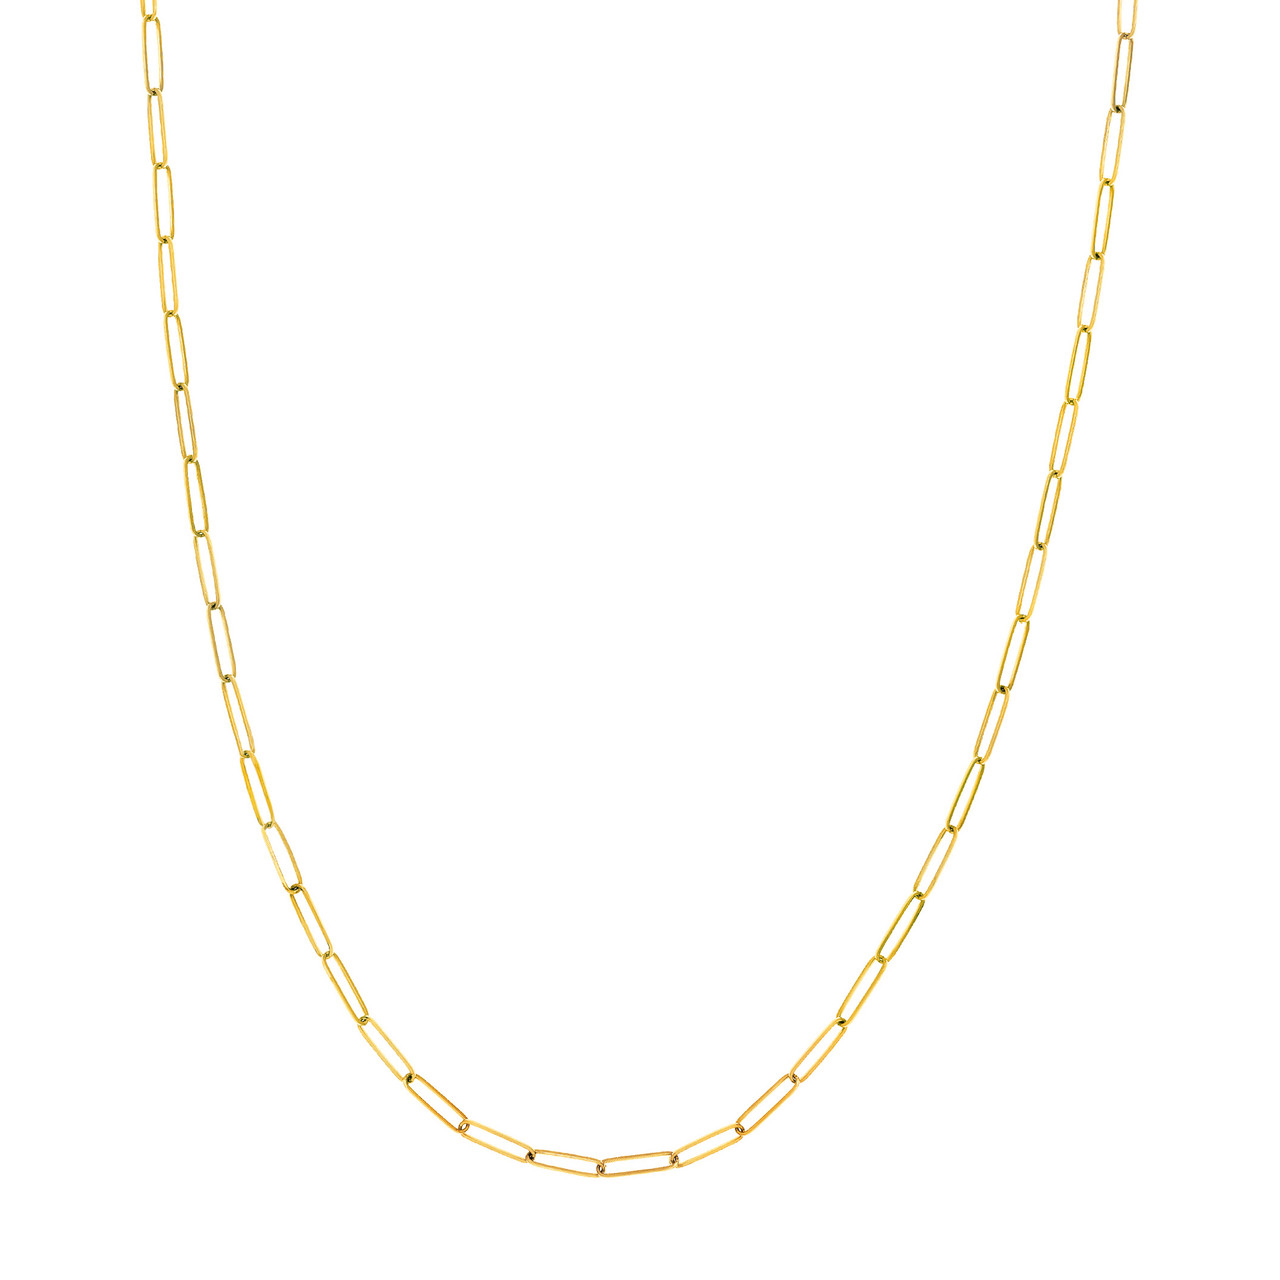 Yellow Gold 2.6mm Elongated Paperclip Chain Necklace 18 inches